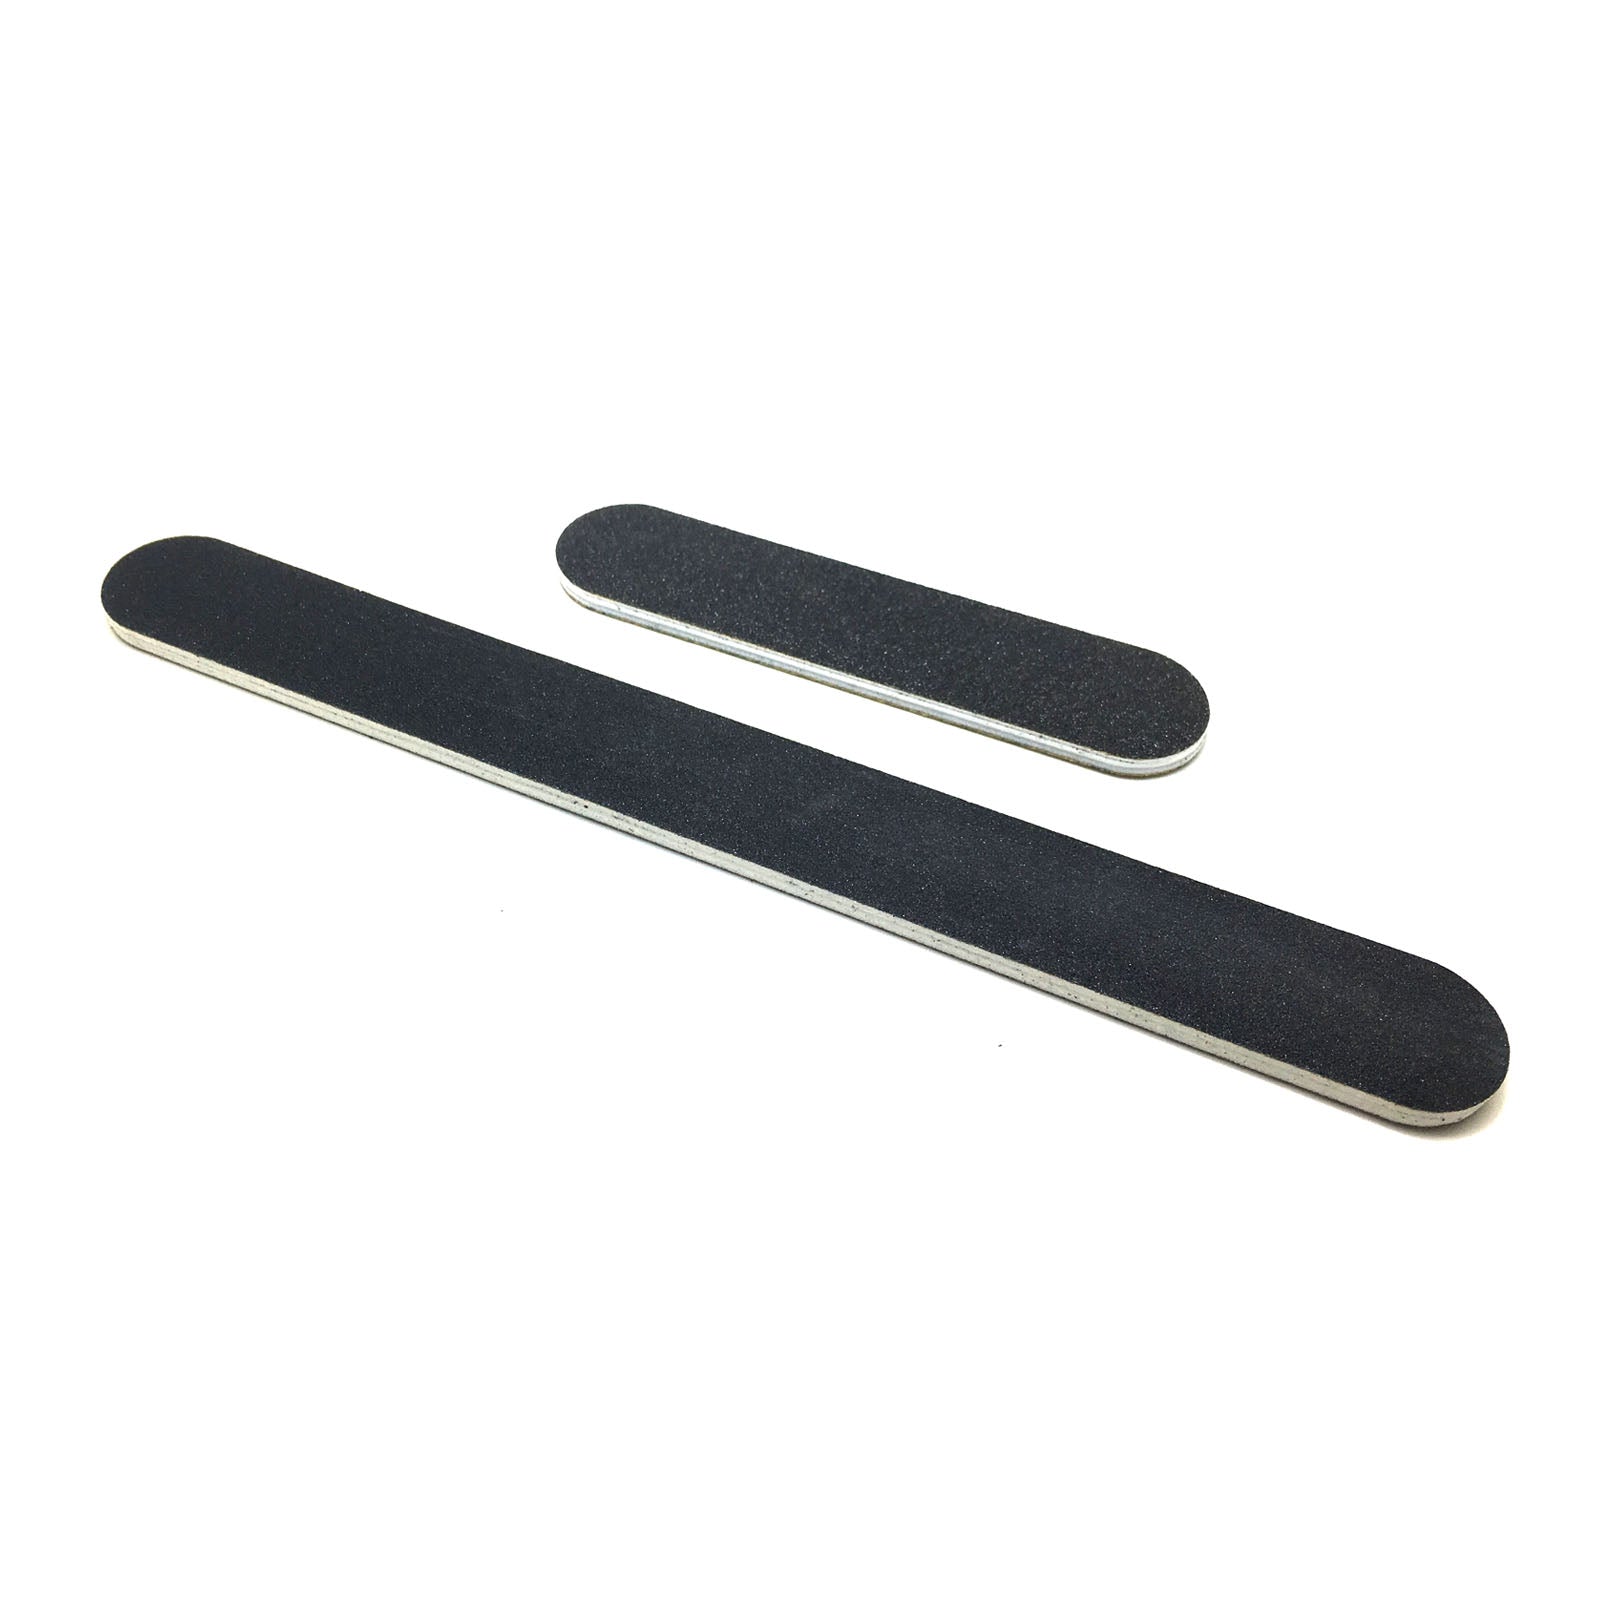 Model Professional grinding rod / curved model sanding sand / grinding bar / length of two [special] Action Figures